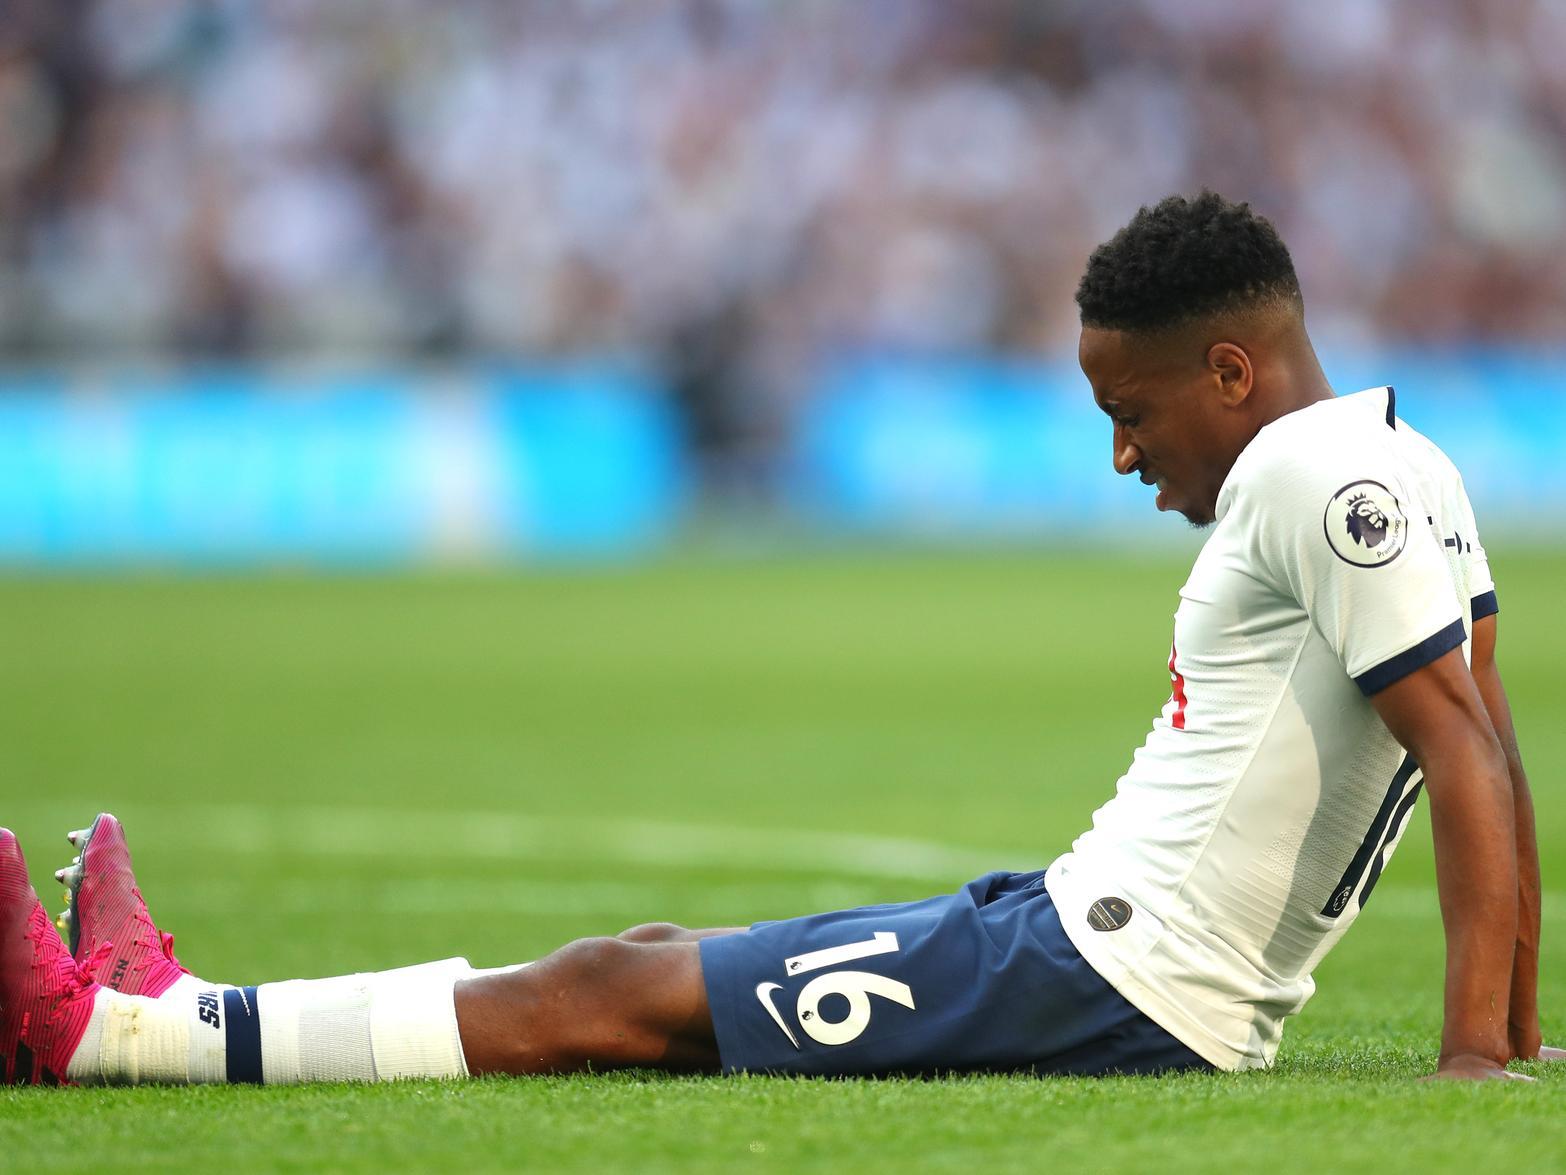 The Tottenham right-back has been tipped by sections of the media to move to the Amex. However, the bookies aren't offering any odds at present